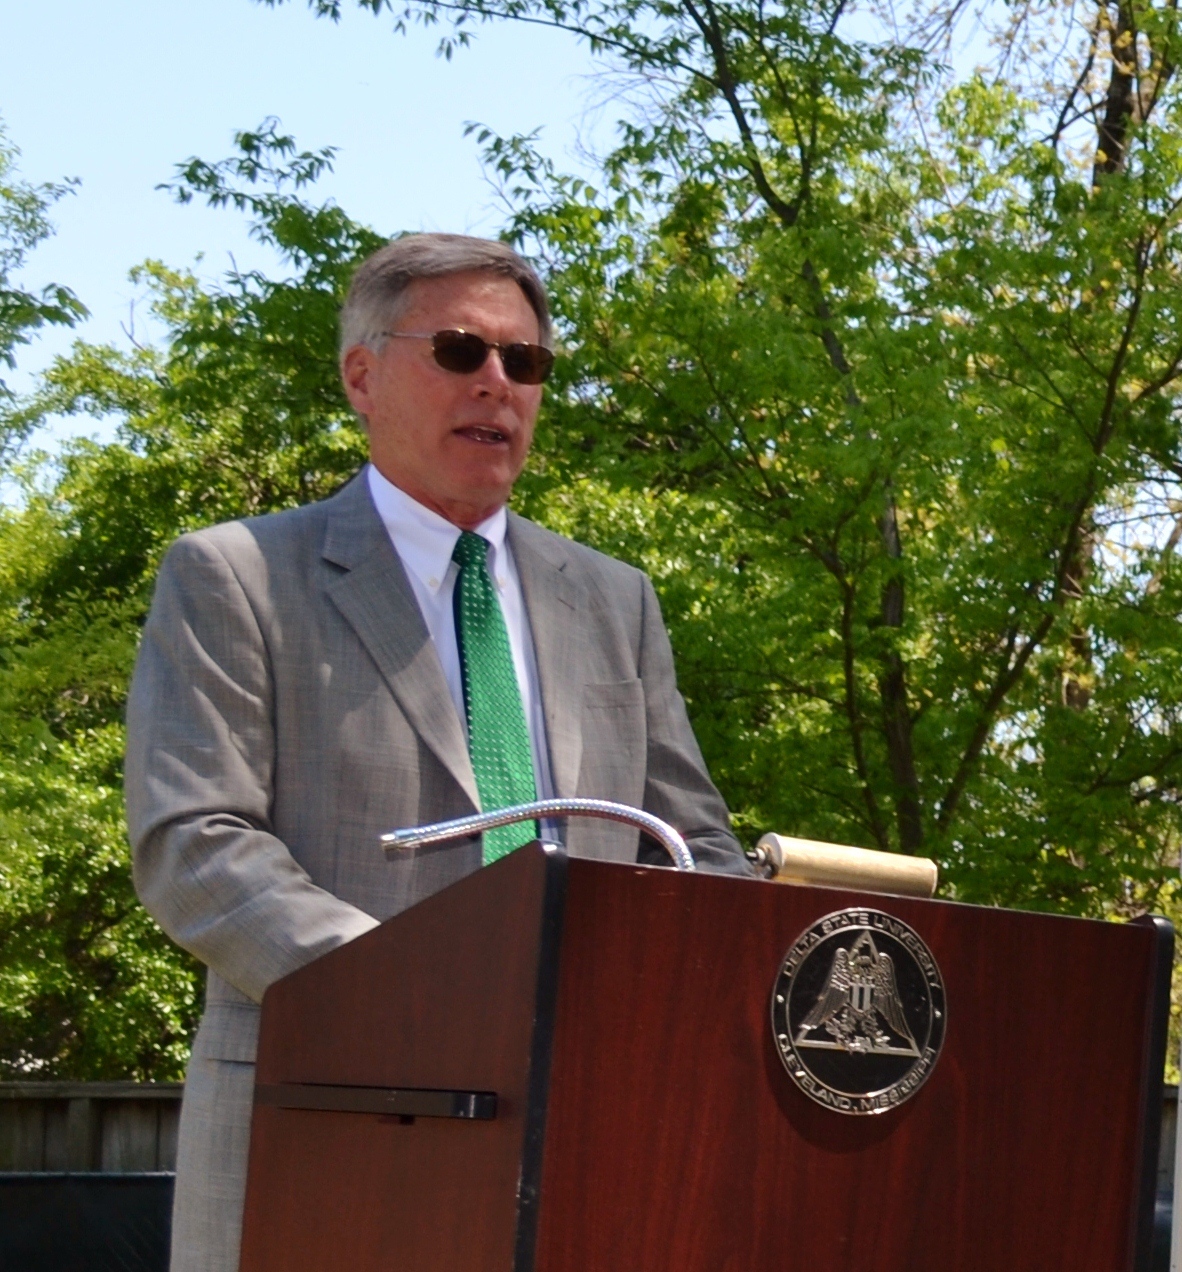 Delta State President William N. LaForge spoke during the Wiley Community Garden ribbon cutting ceremony, continuing his efforts for earth awareness. 